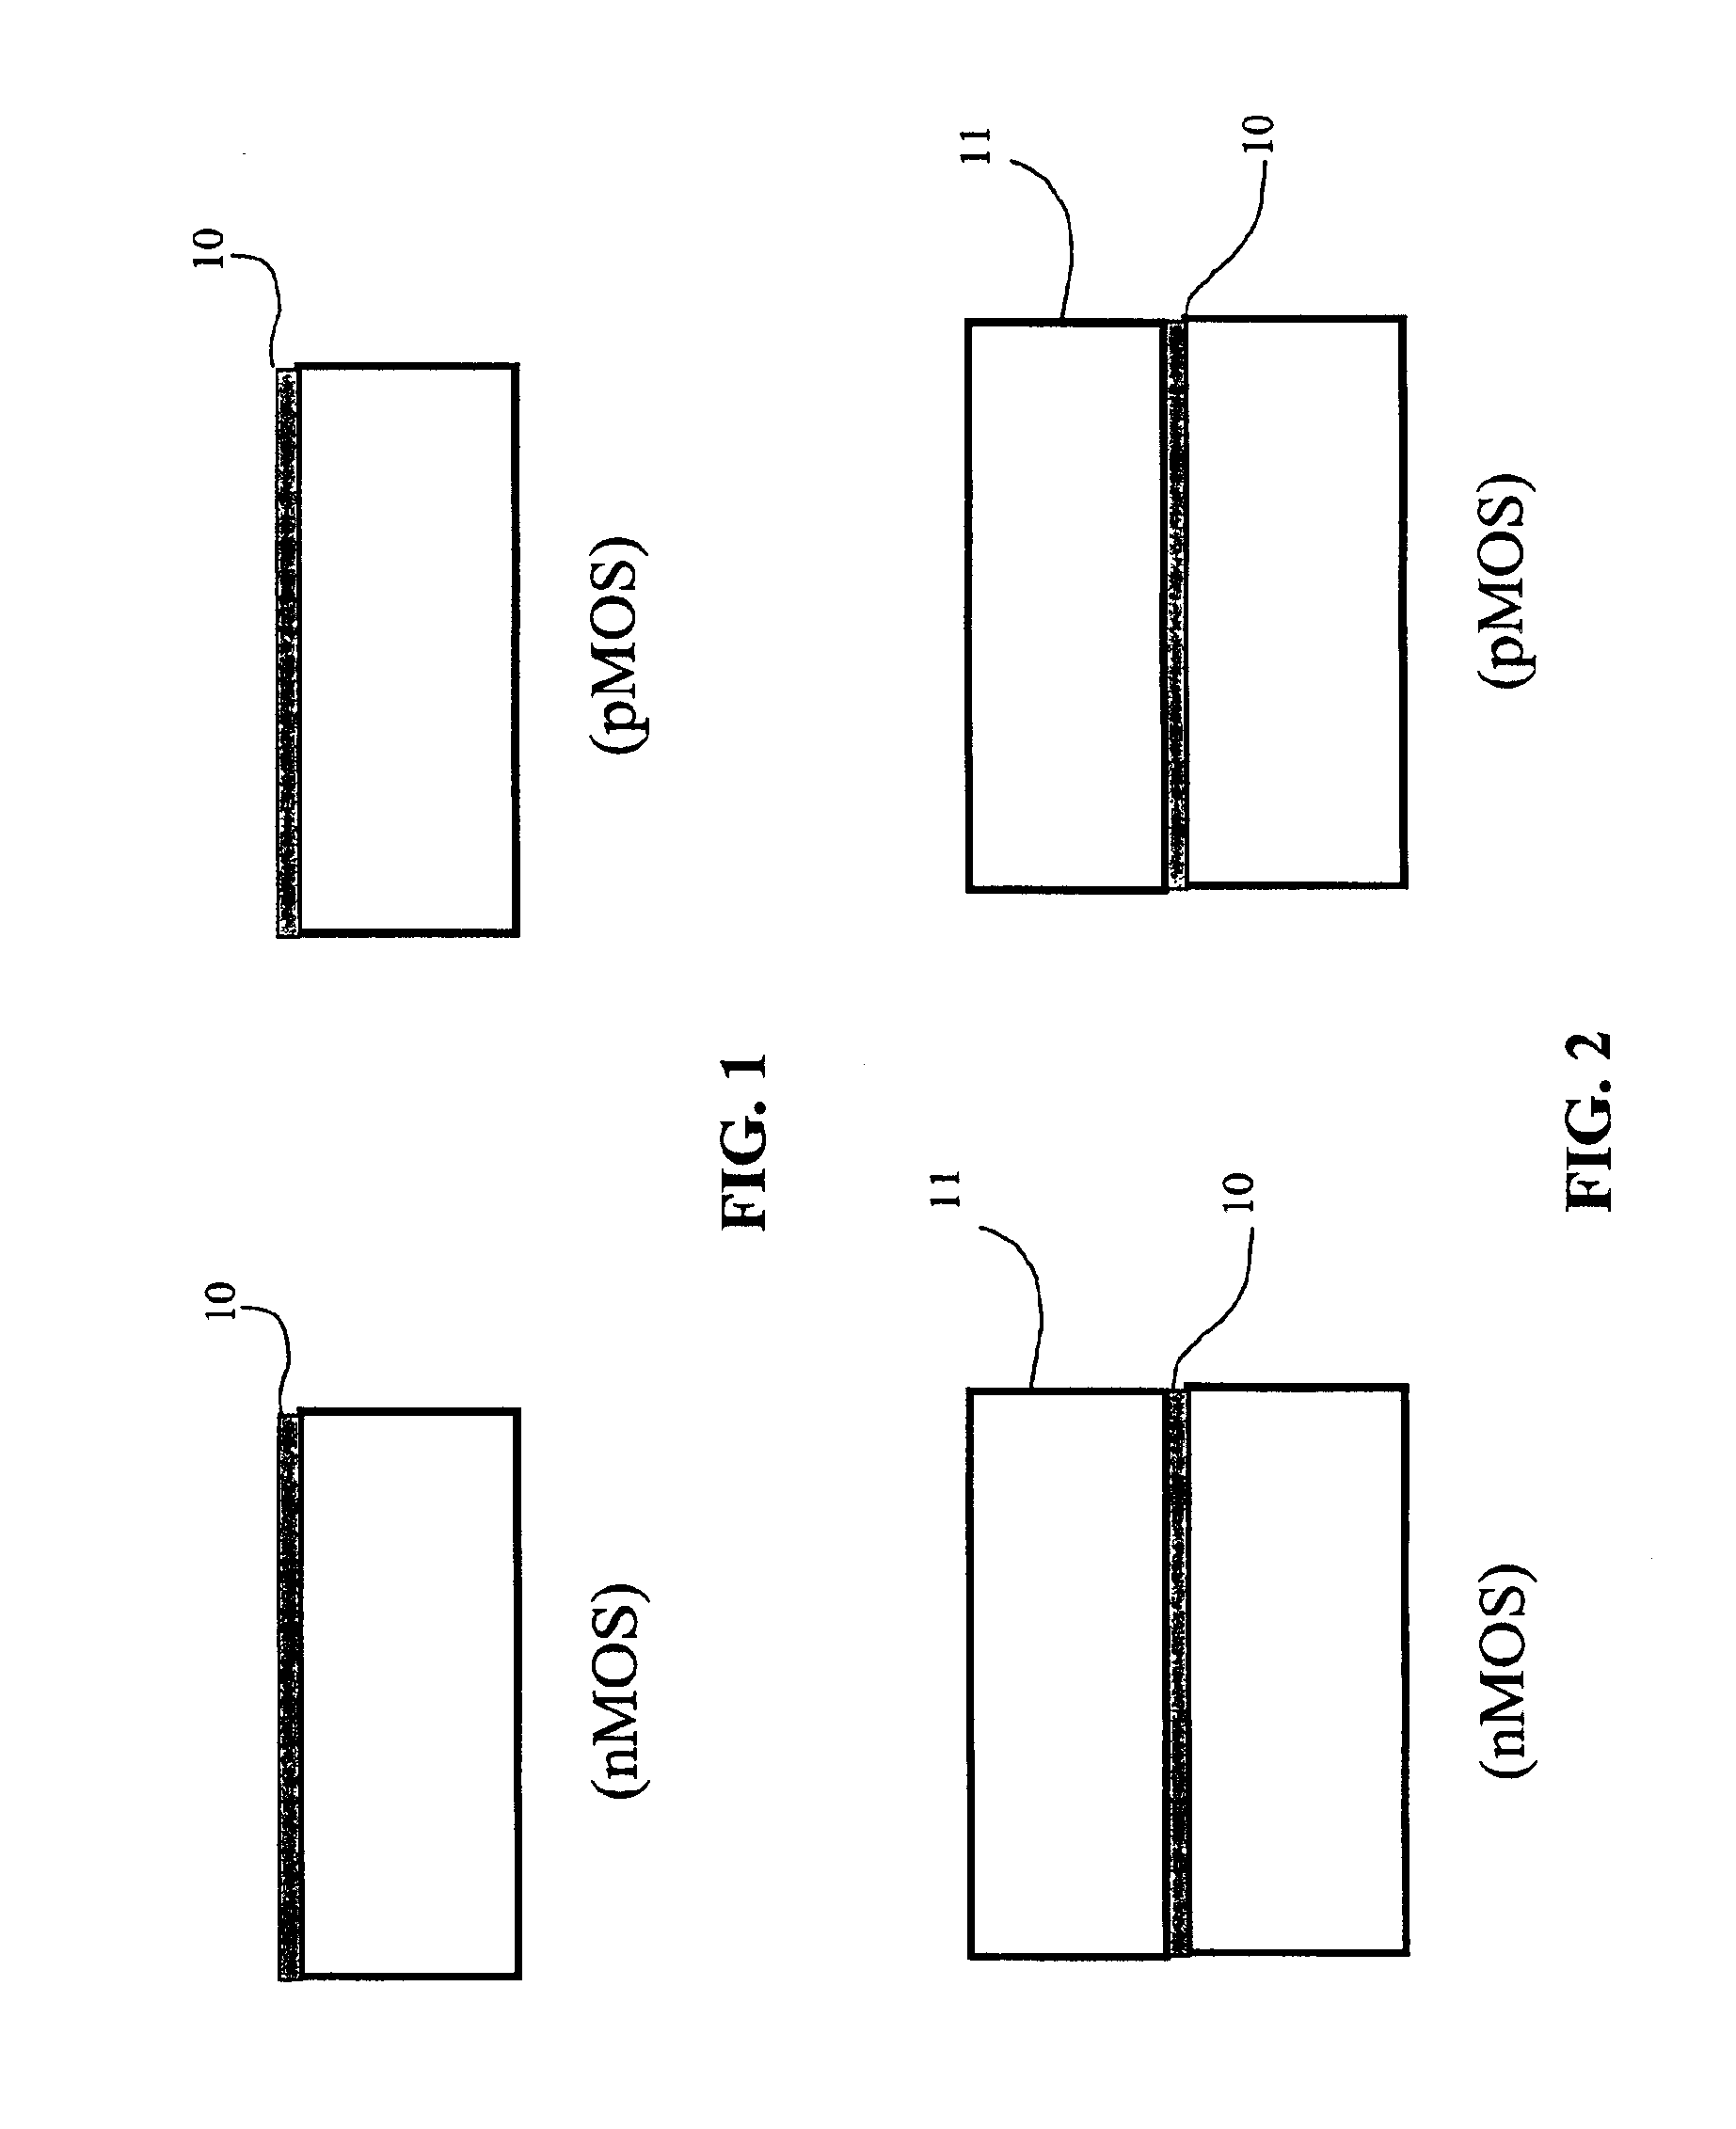 Formation of dual work function gate electrode